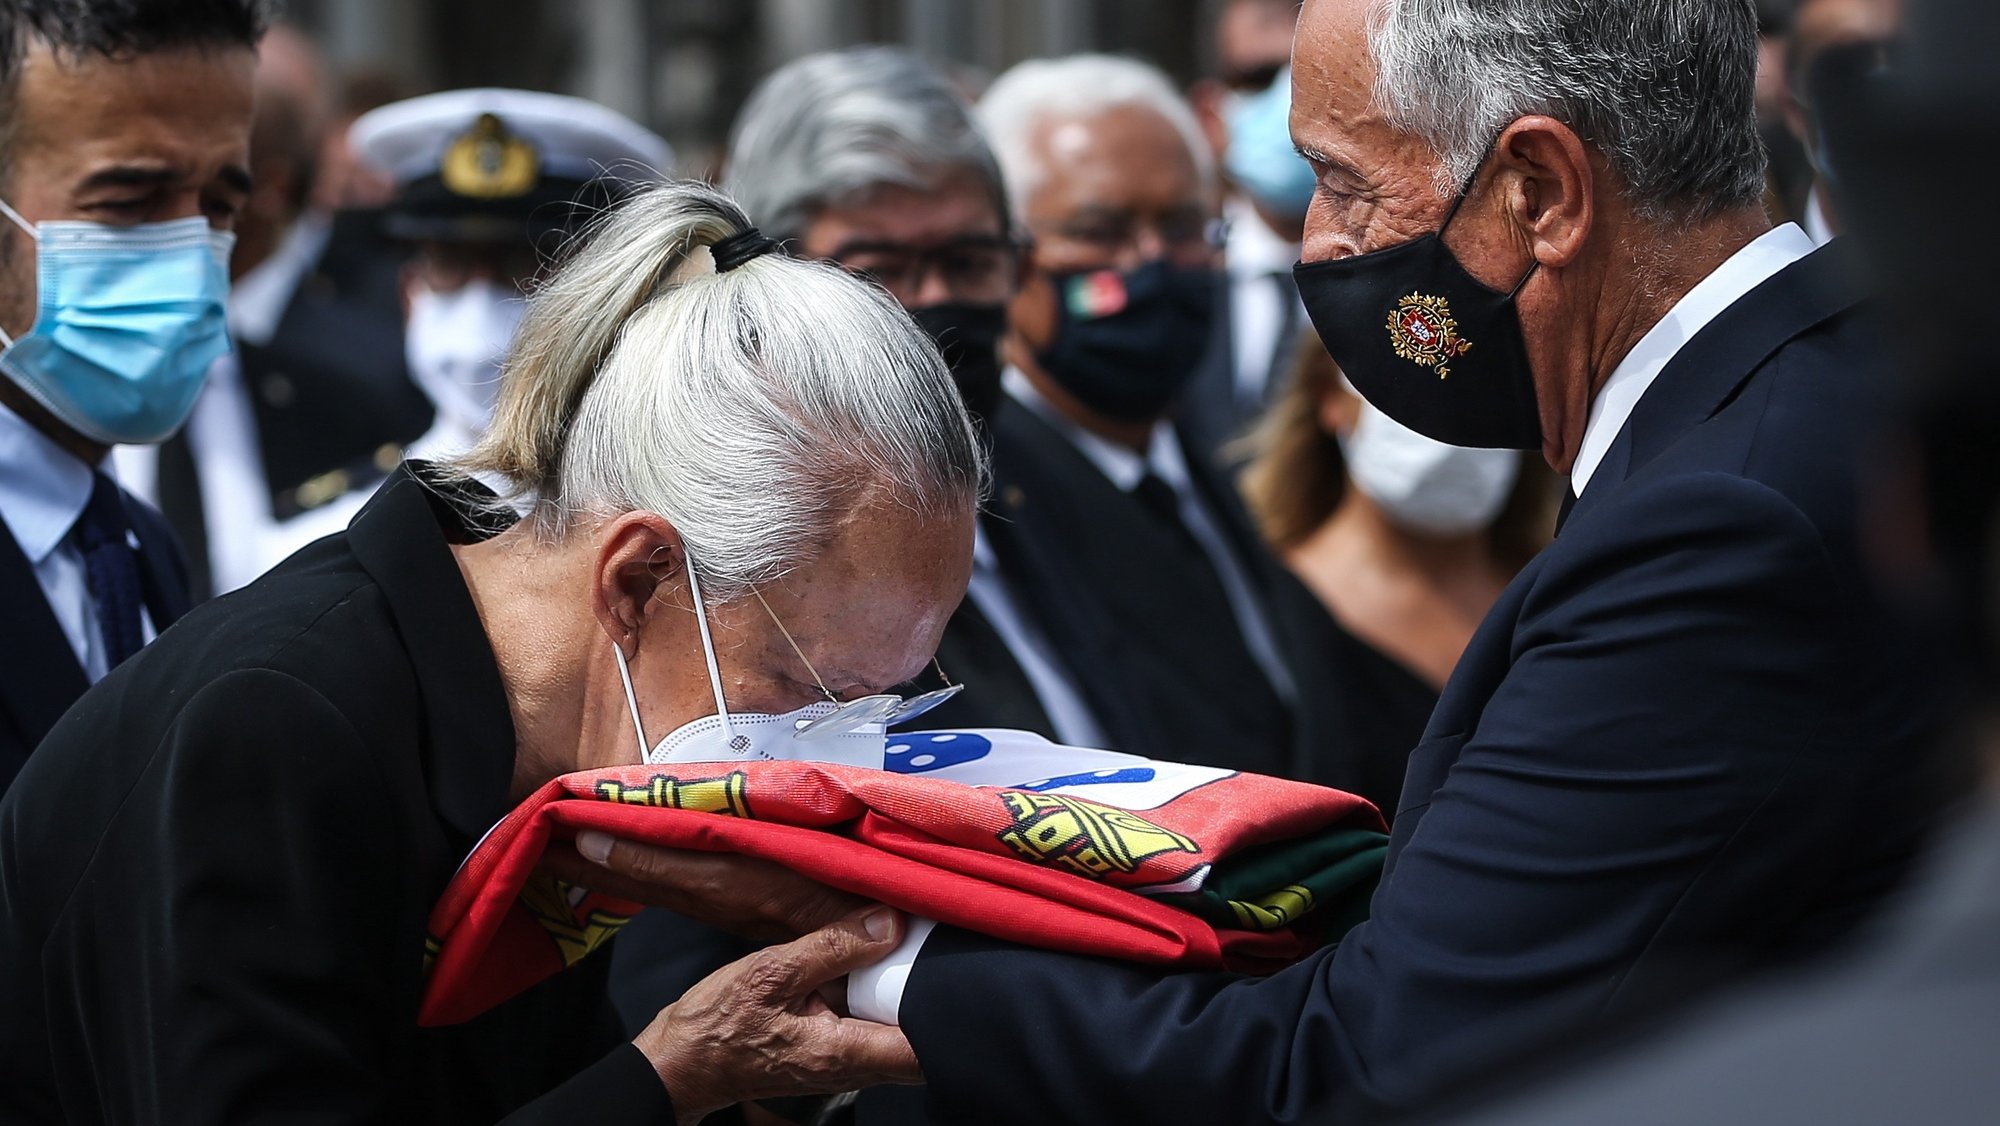 epa09463415 Portuguese President, Marcelo Rebelo de Sousa, (R) gives the national flag to Jorge Sampaio&#039;s wife, Maria Jose Ritta, during the funeral service for the late Portuguese President, Jorge Sampaio, at Alto de Sao Joao cemetery in Lisbon, Portugal, 12 September 2021. Jorge Sampaio, former secretary-general of the Socialist Party &#039;PS&#039; (1989/1992) and two-term President of the Republic (1996/2006), died on 10 September 2021, at the age of 81, at Santa Cruz Hospital, in Lisbon, where he had been hospitalized since 27 August, following respiratory difficulties.  EPA/RODRIGO ANTUNES